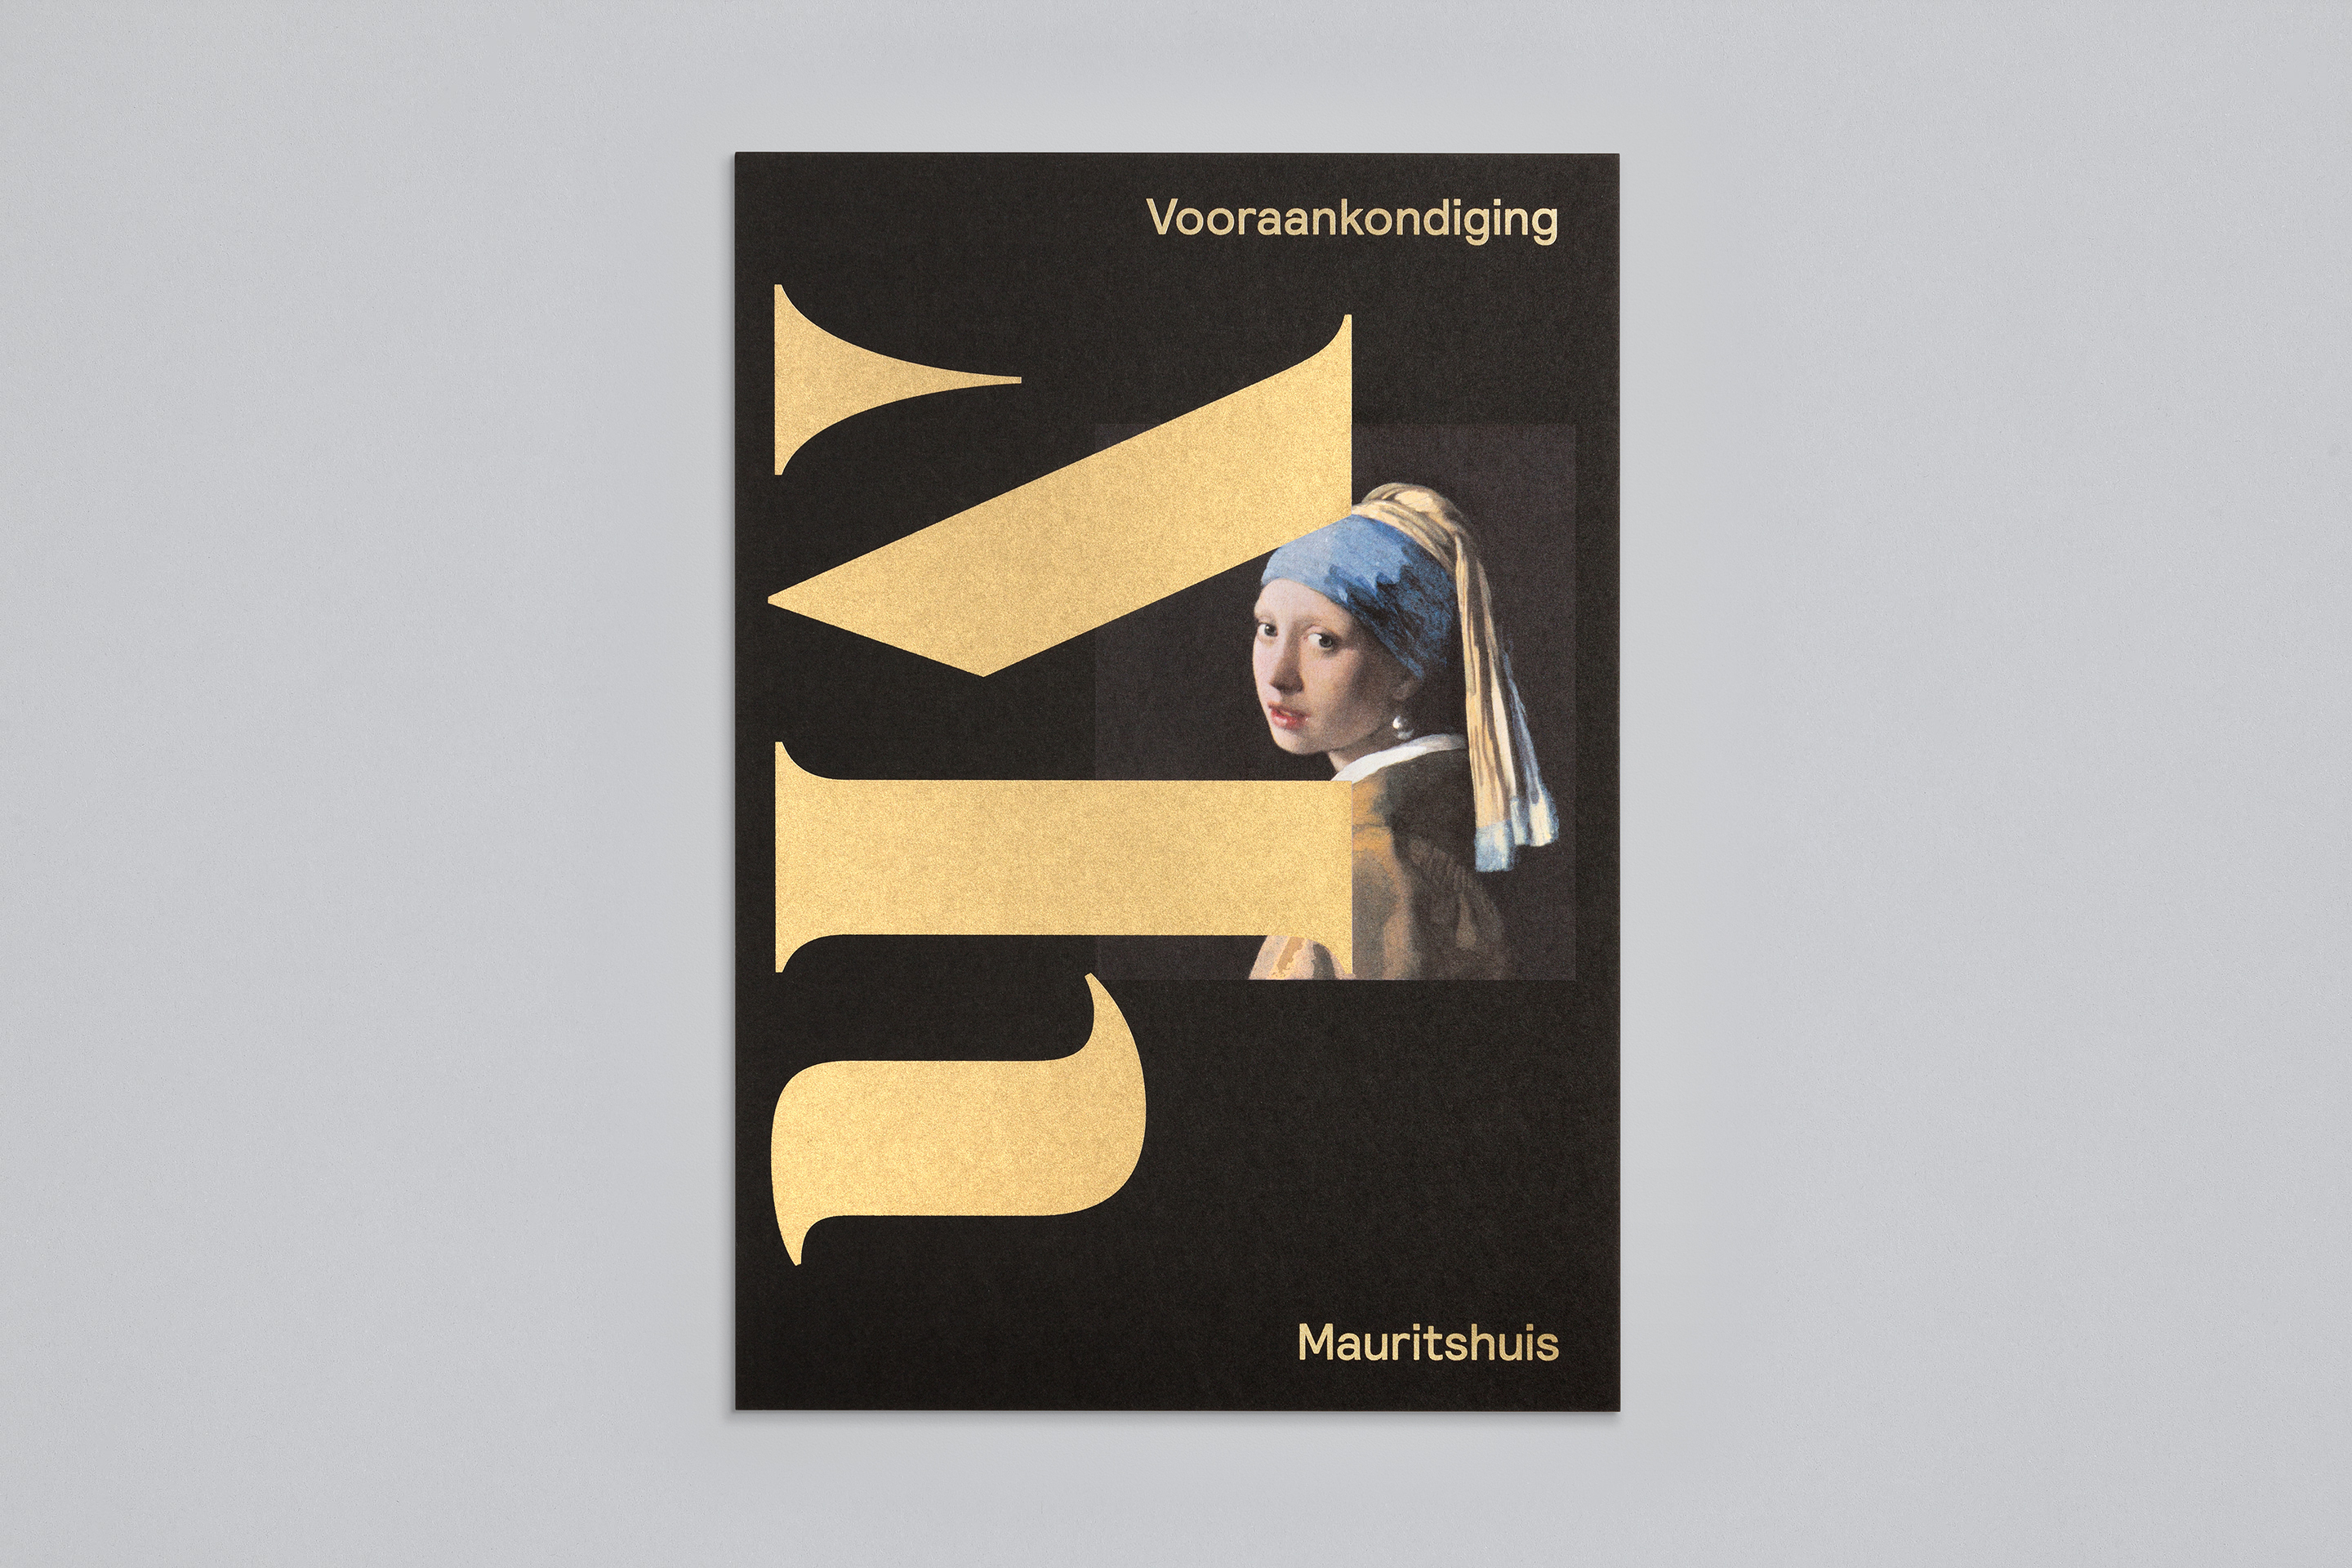 studio dumbar design visual brand identity for Mauritshuis Royal Picture Gallery  invitation design girl and pearl earring and monogram logo design